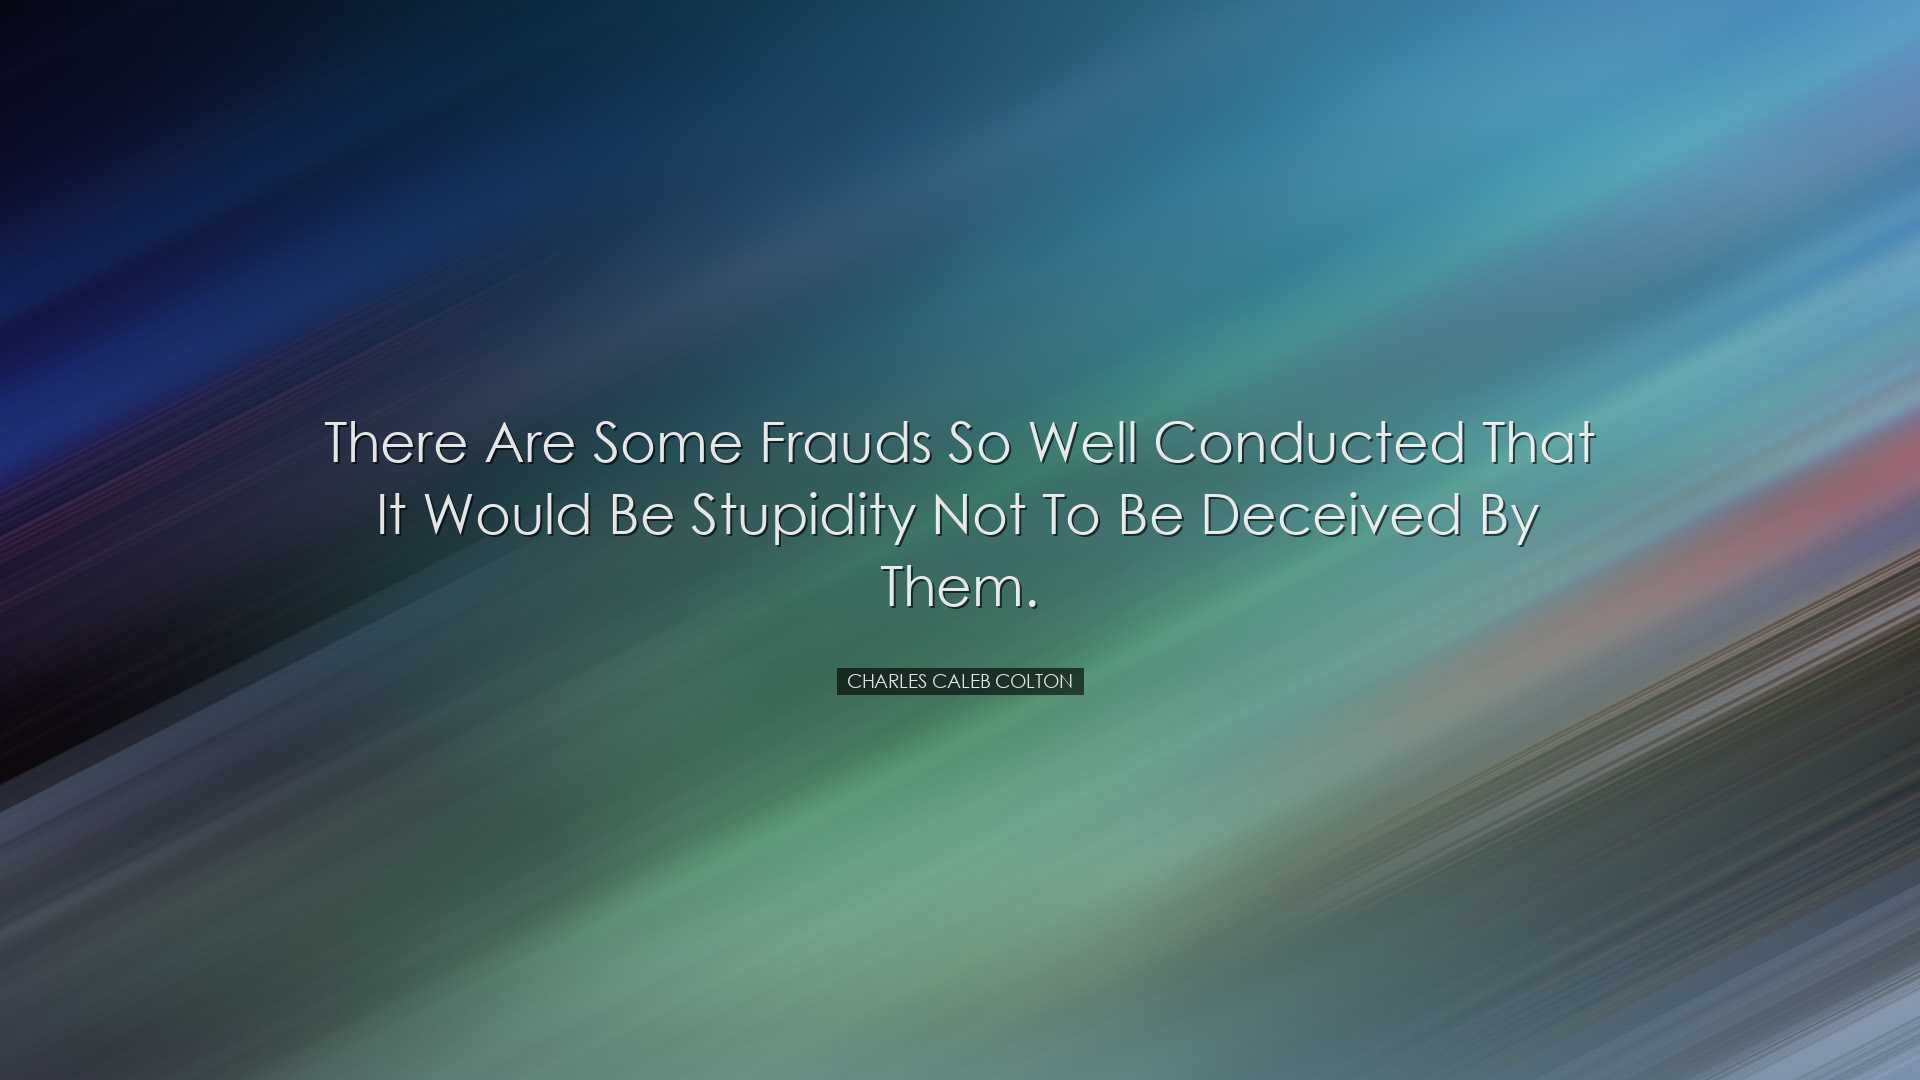 There are some frauds so well conducted that it would be stupidity